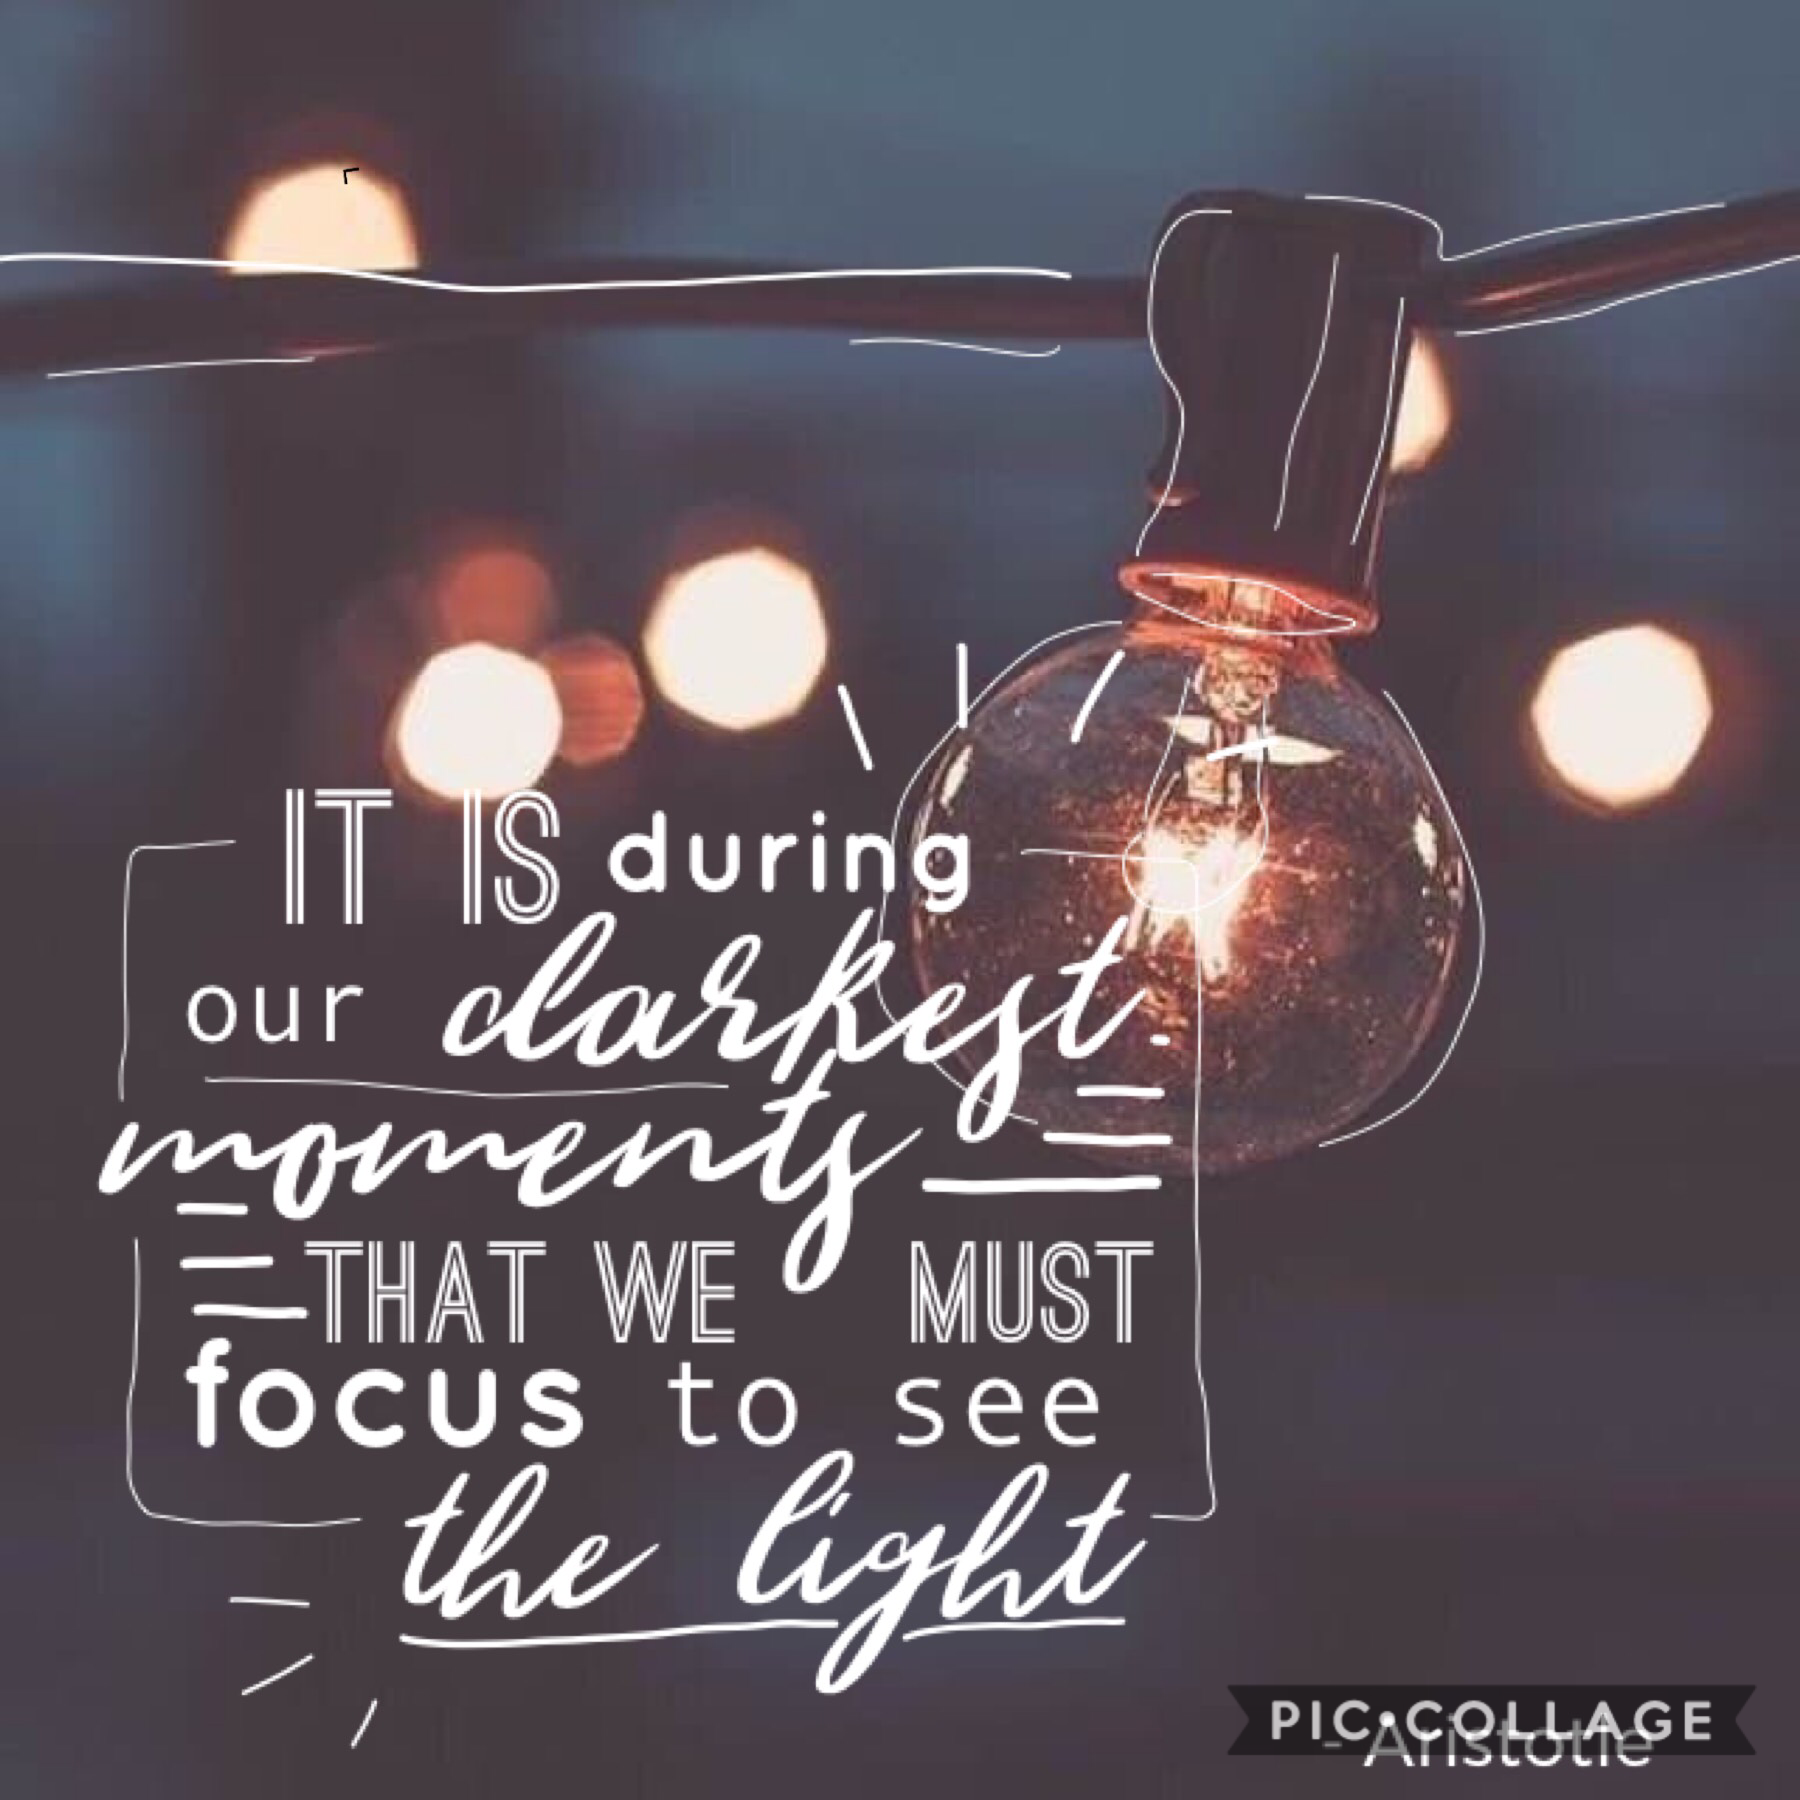 💡It is during our darkest moments that we must focus on the light💡
I really like this!
————
Side note: I randomly decided to change my icon but it’s only temporary